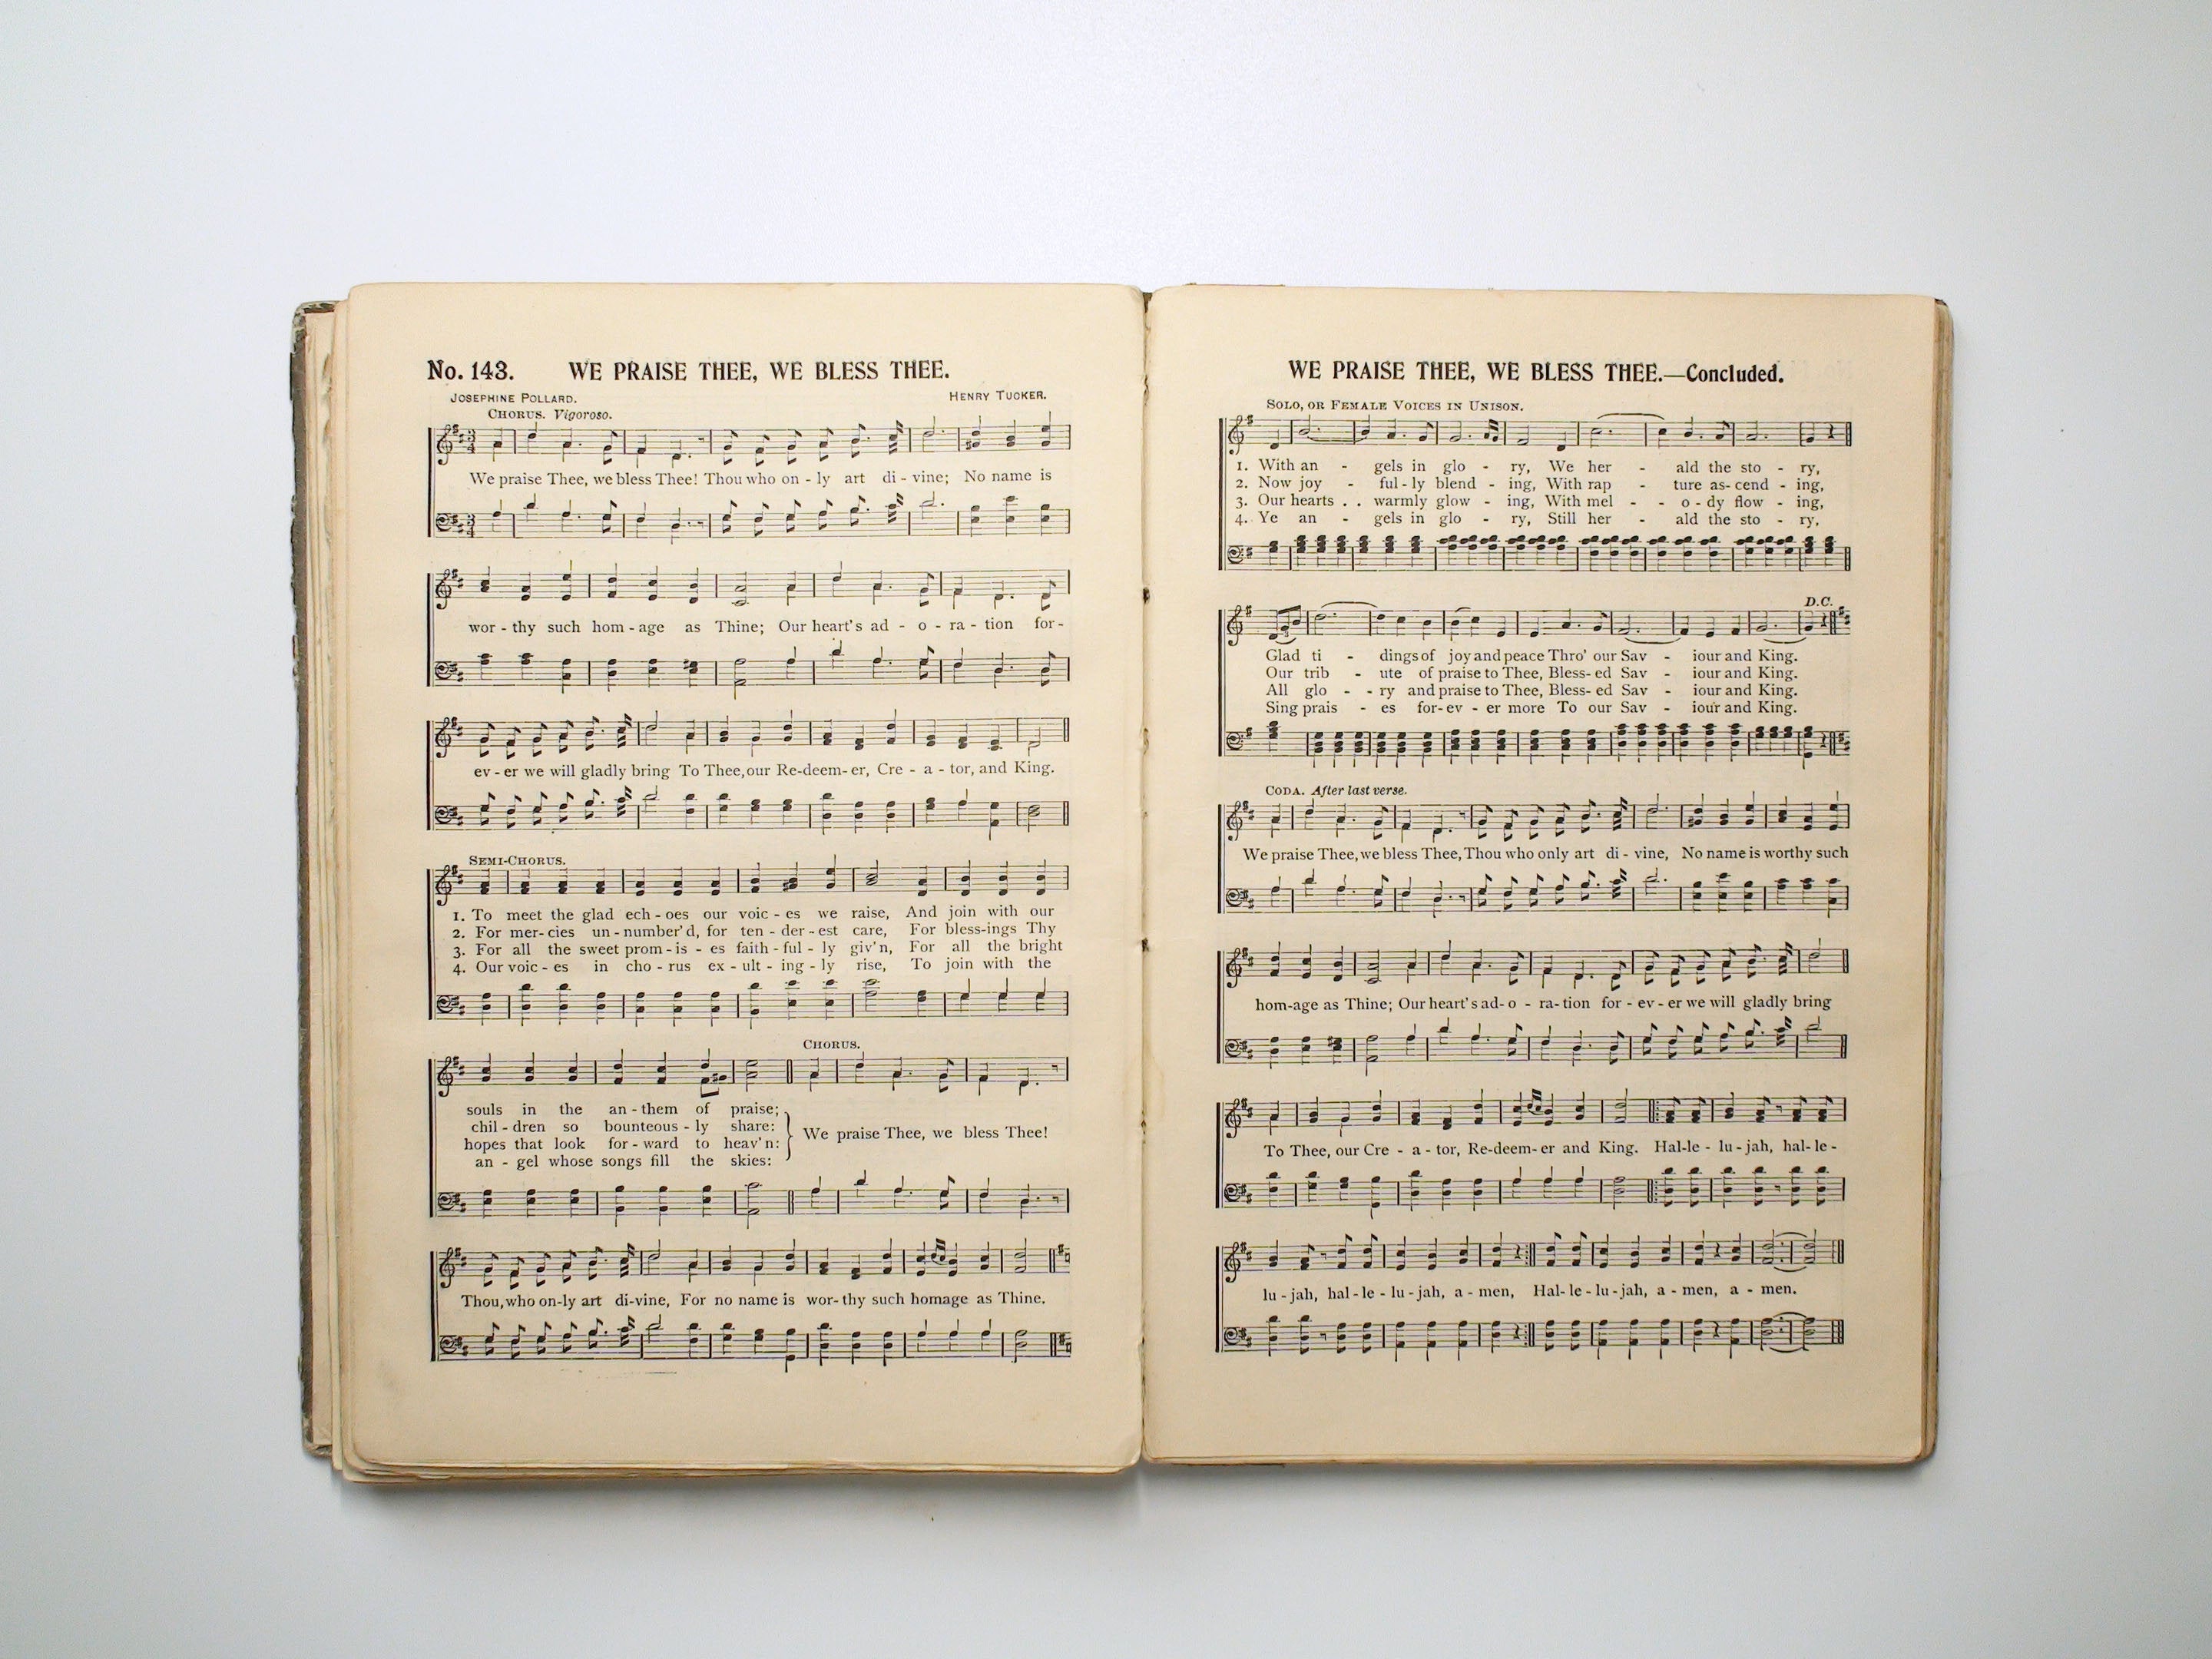 Uplifted Voices, A New Century Hymn Book, Adam Geibel and R. Frank Lehman, 1901